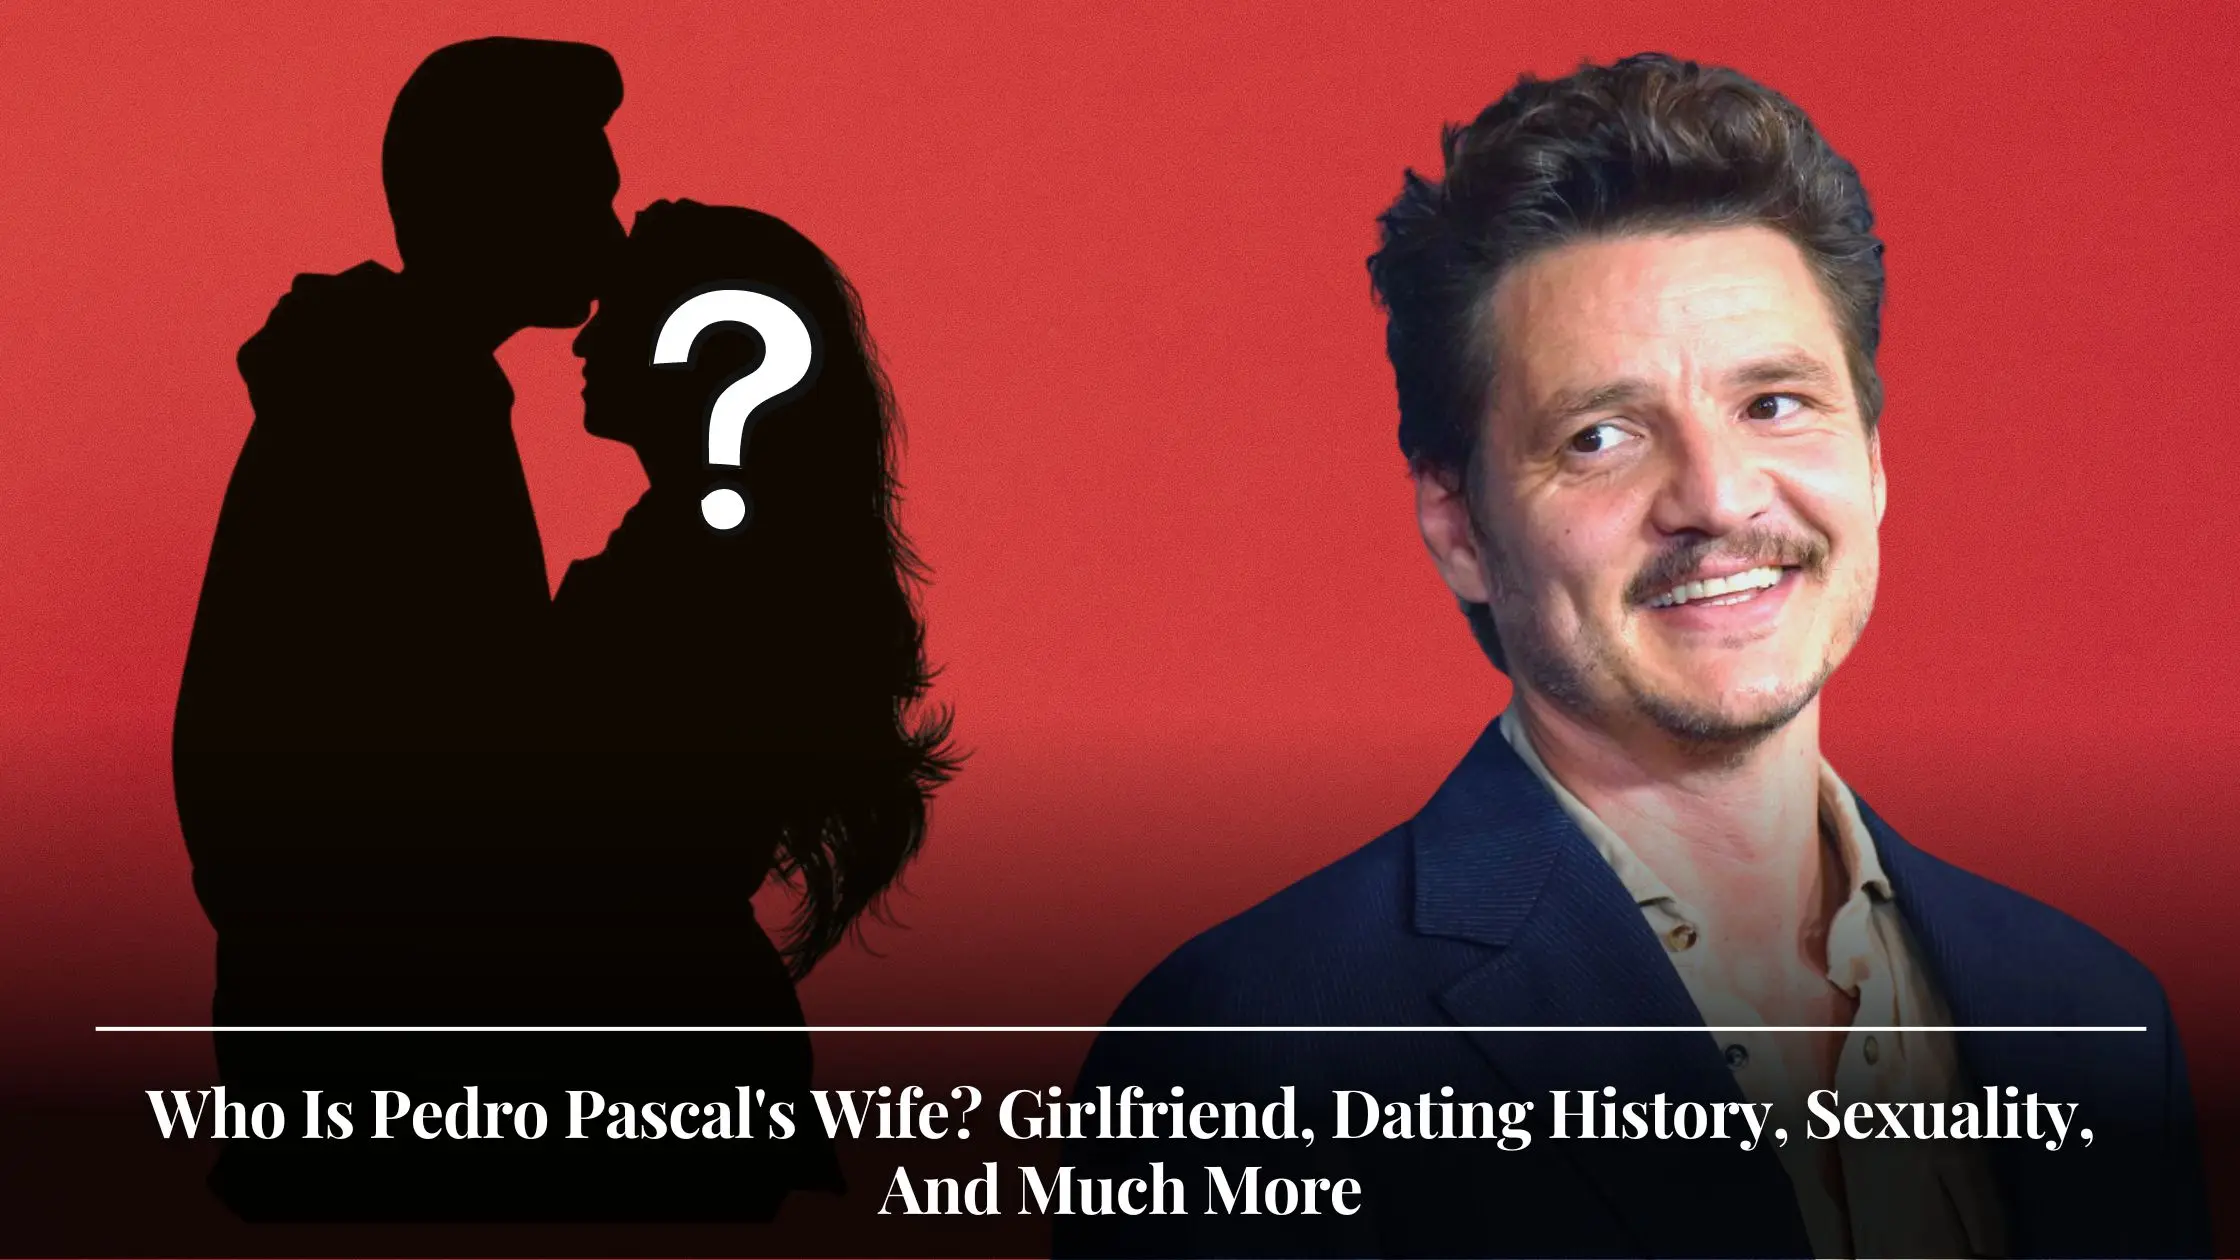 Who Is Pedro Pascal's Wife Girlfriend, Dating History, Sexuality, And Much More